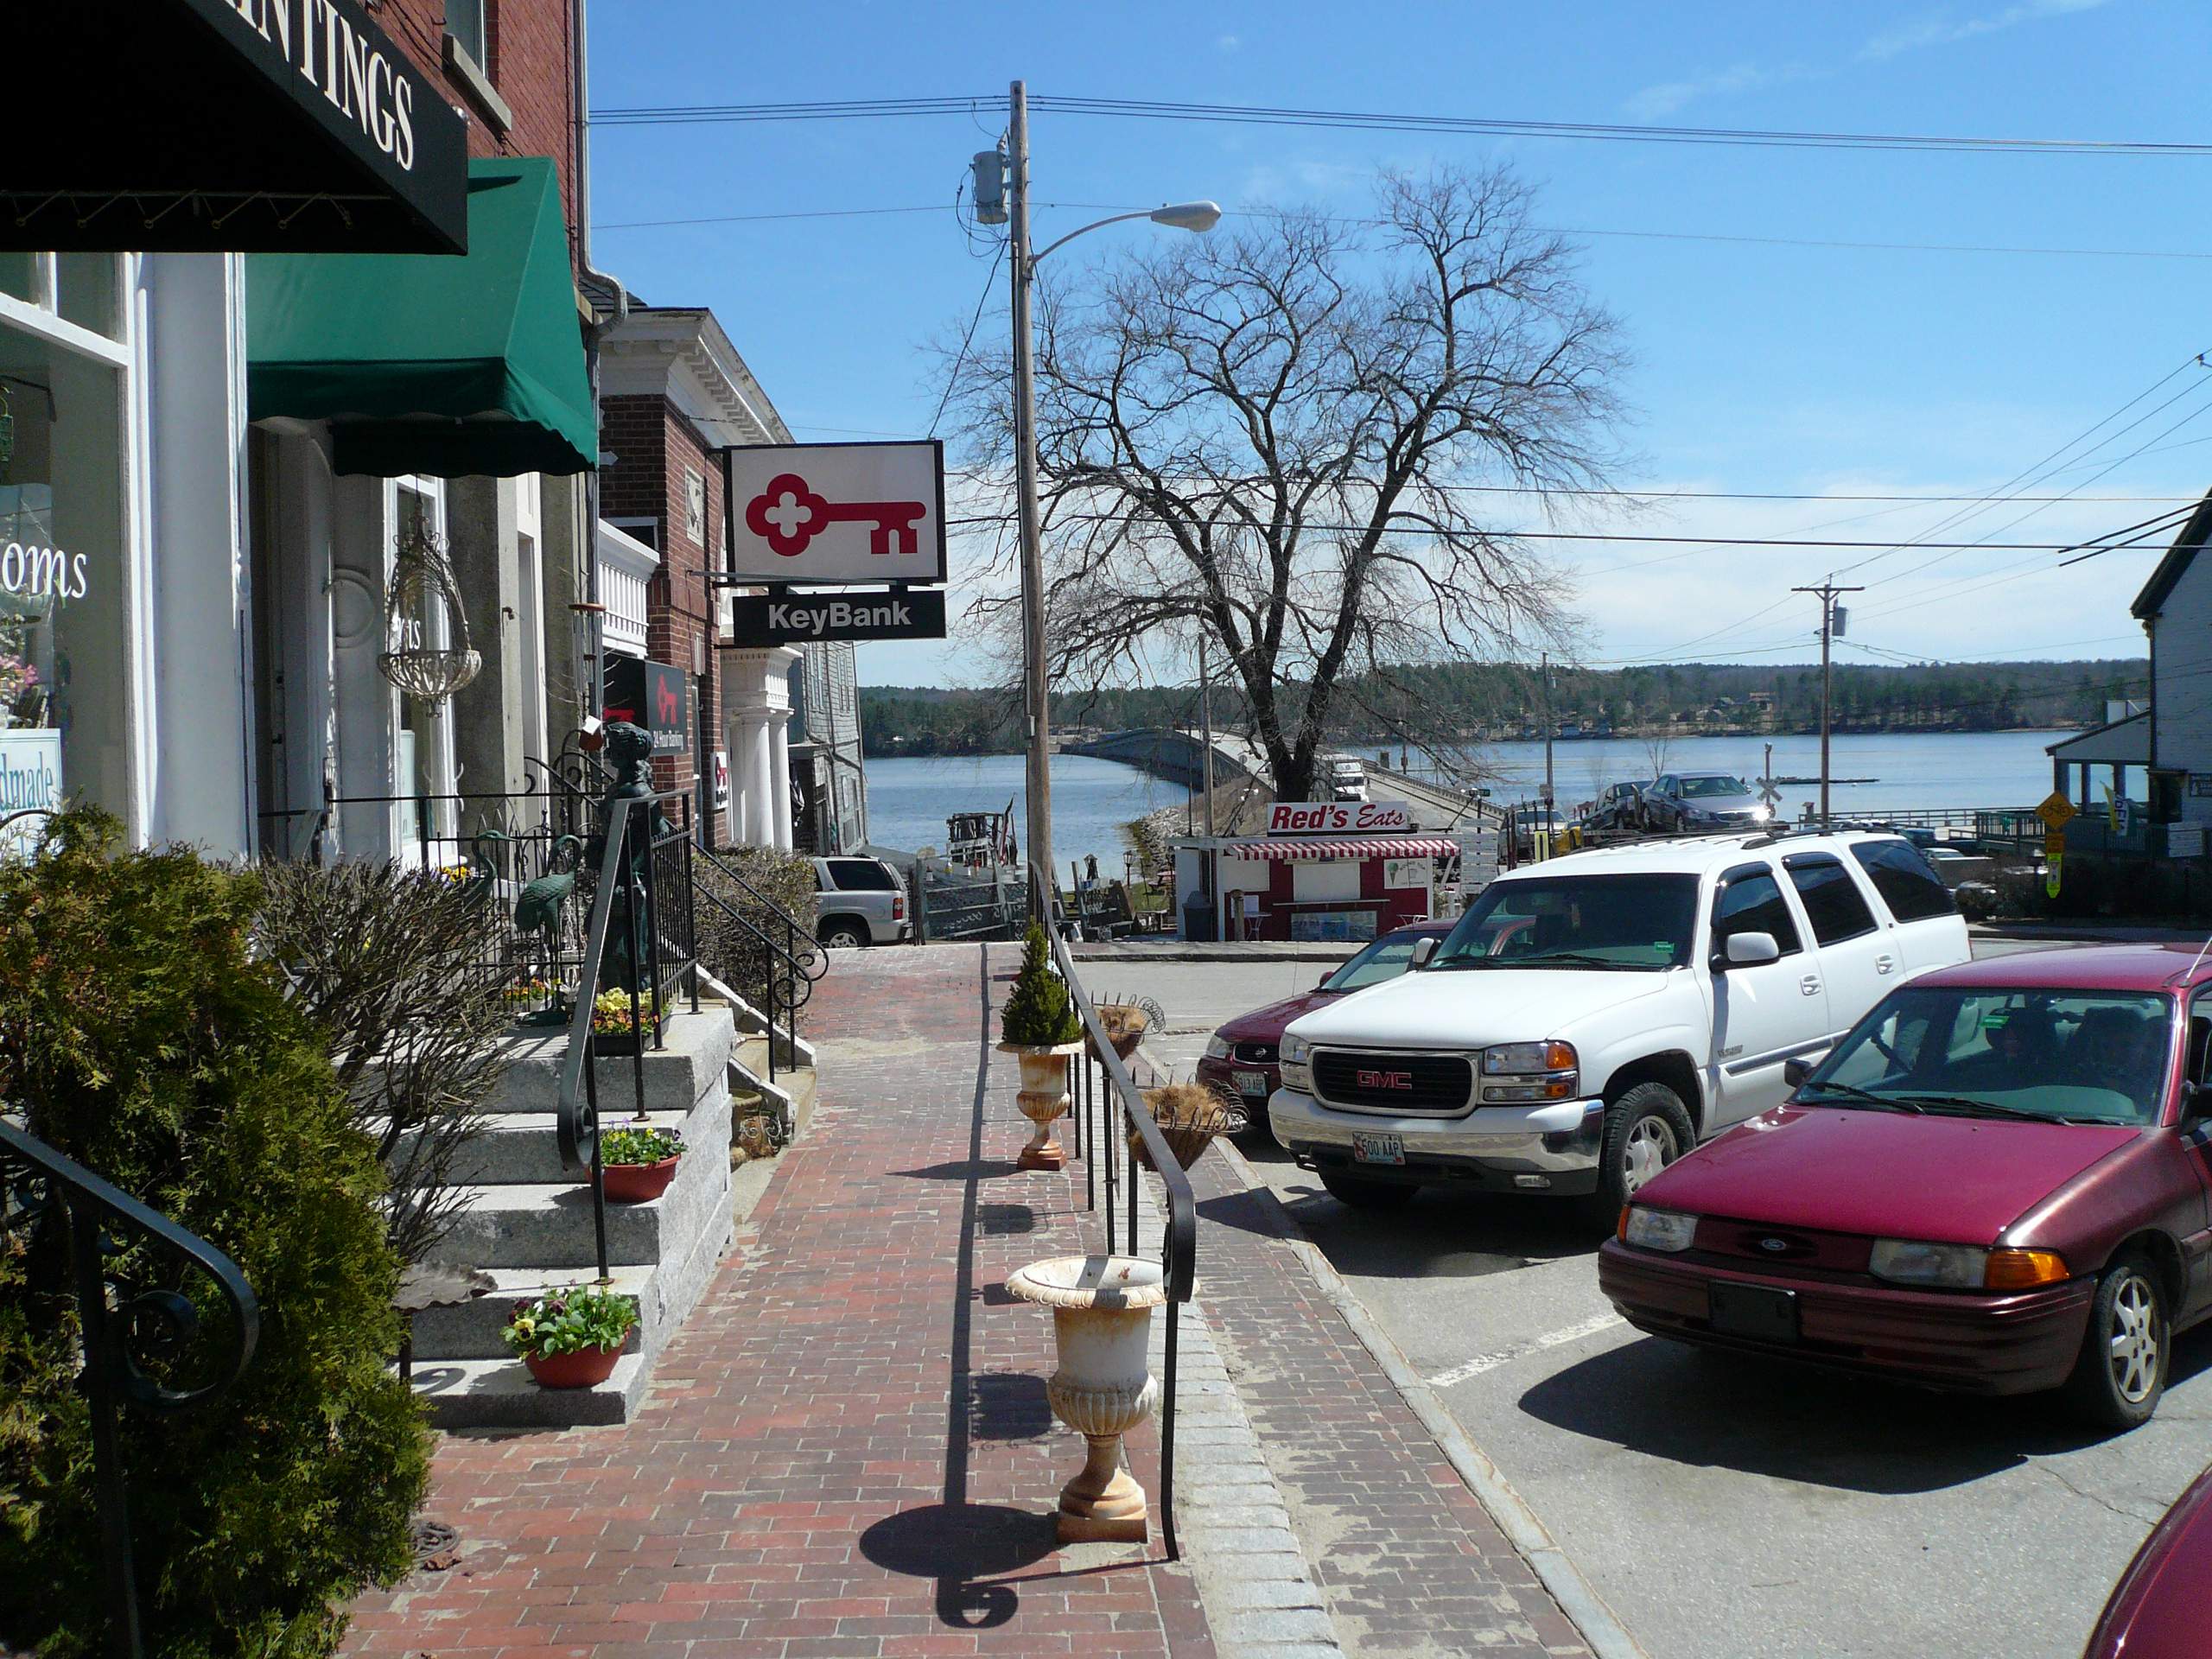 In downtown Wiscasset, I found Red's Eats which is world famous for its lobster rolls.  Unfortunately, it was closed!